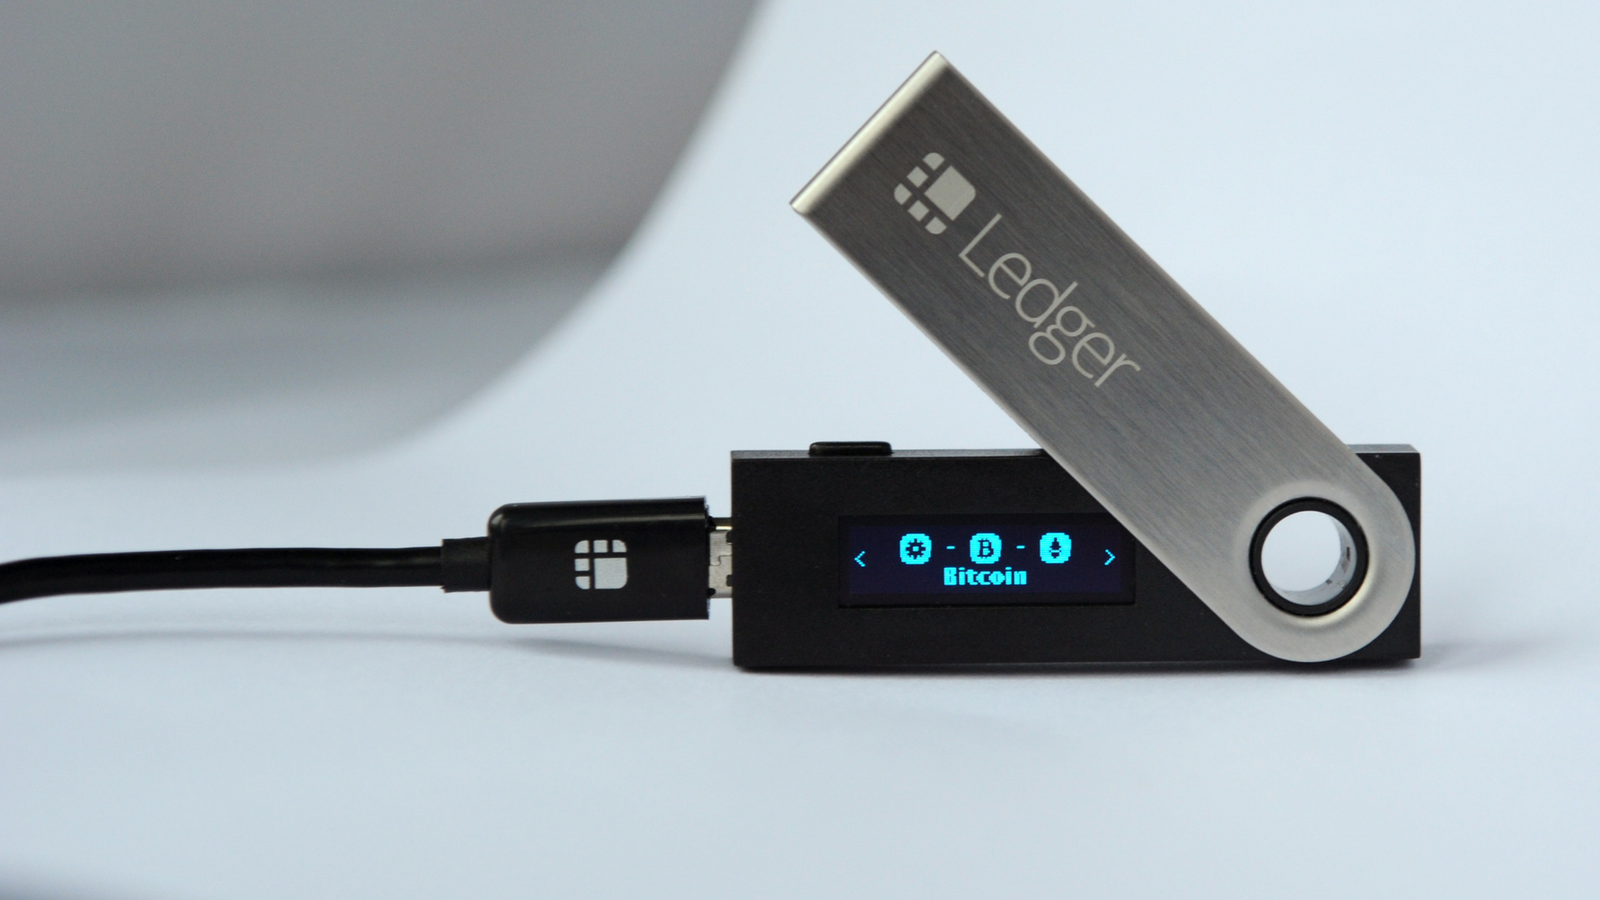 Ledger: make your currency more secure